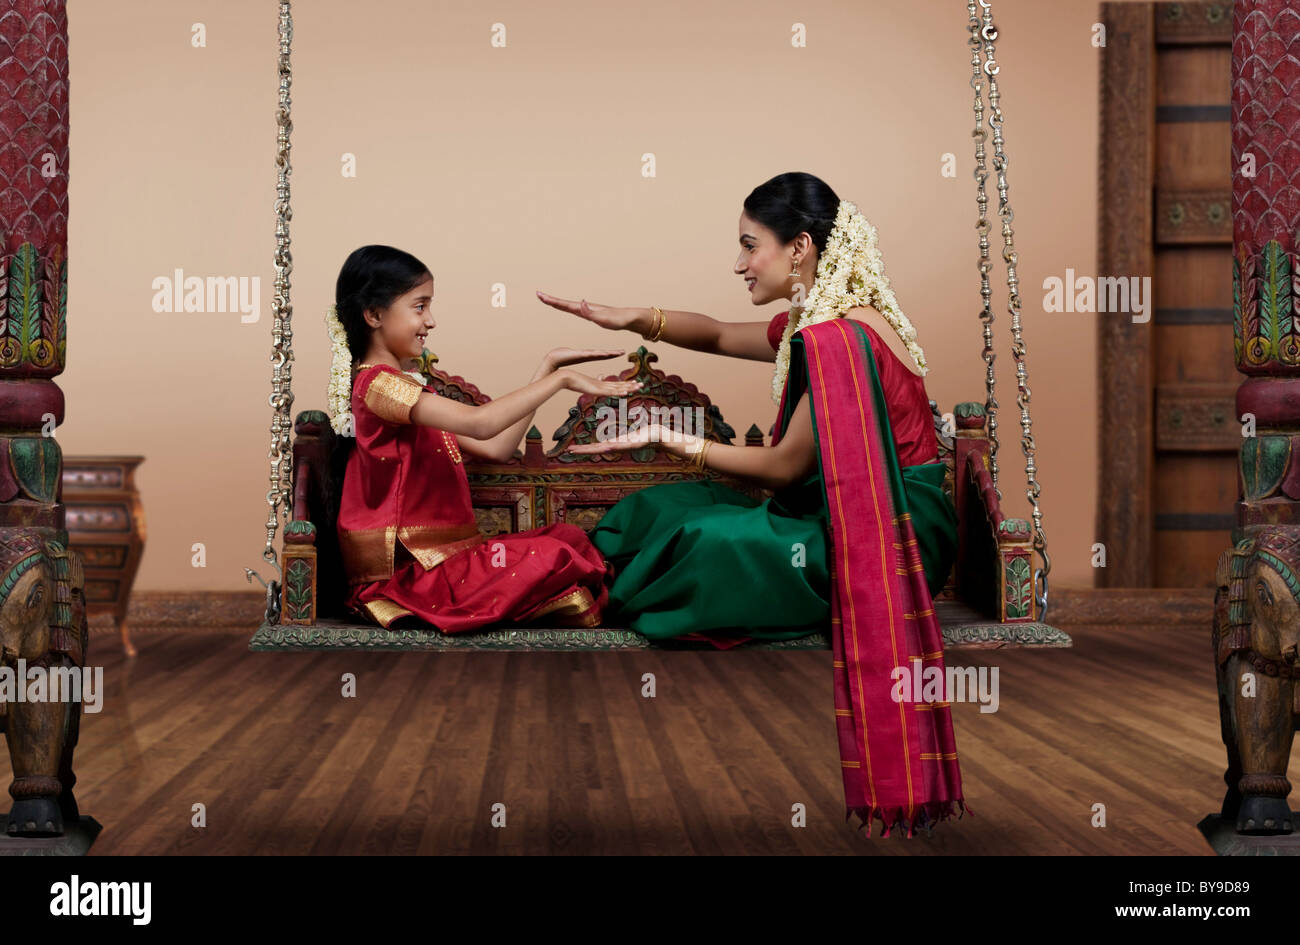 South Indian woman playing with her daughter Stock Photo